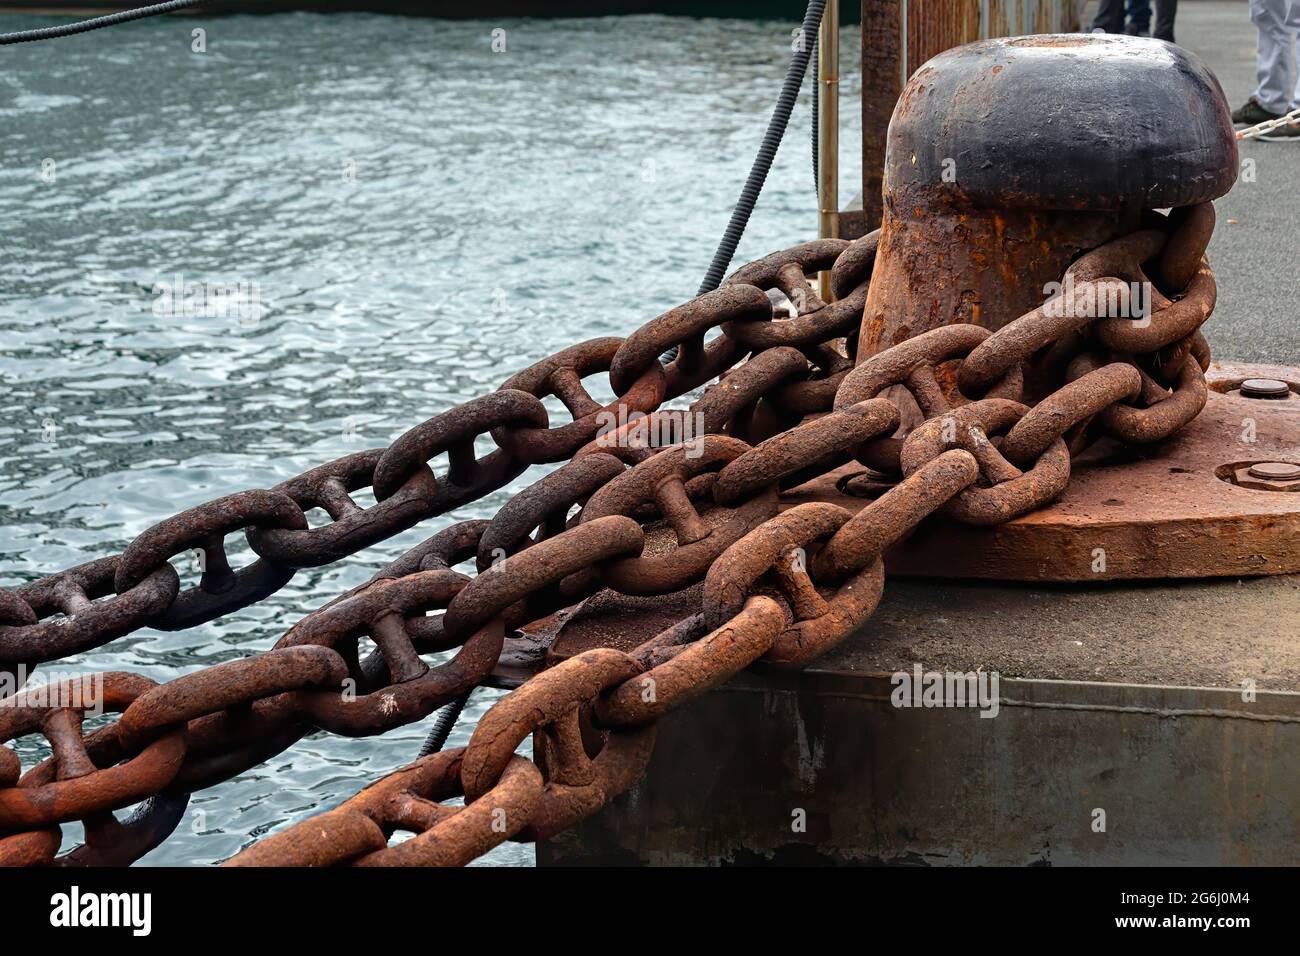 Stud link type rusty ship anchor chain and one headed mooring bitt on a ferry port. Stock Photo